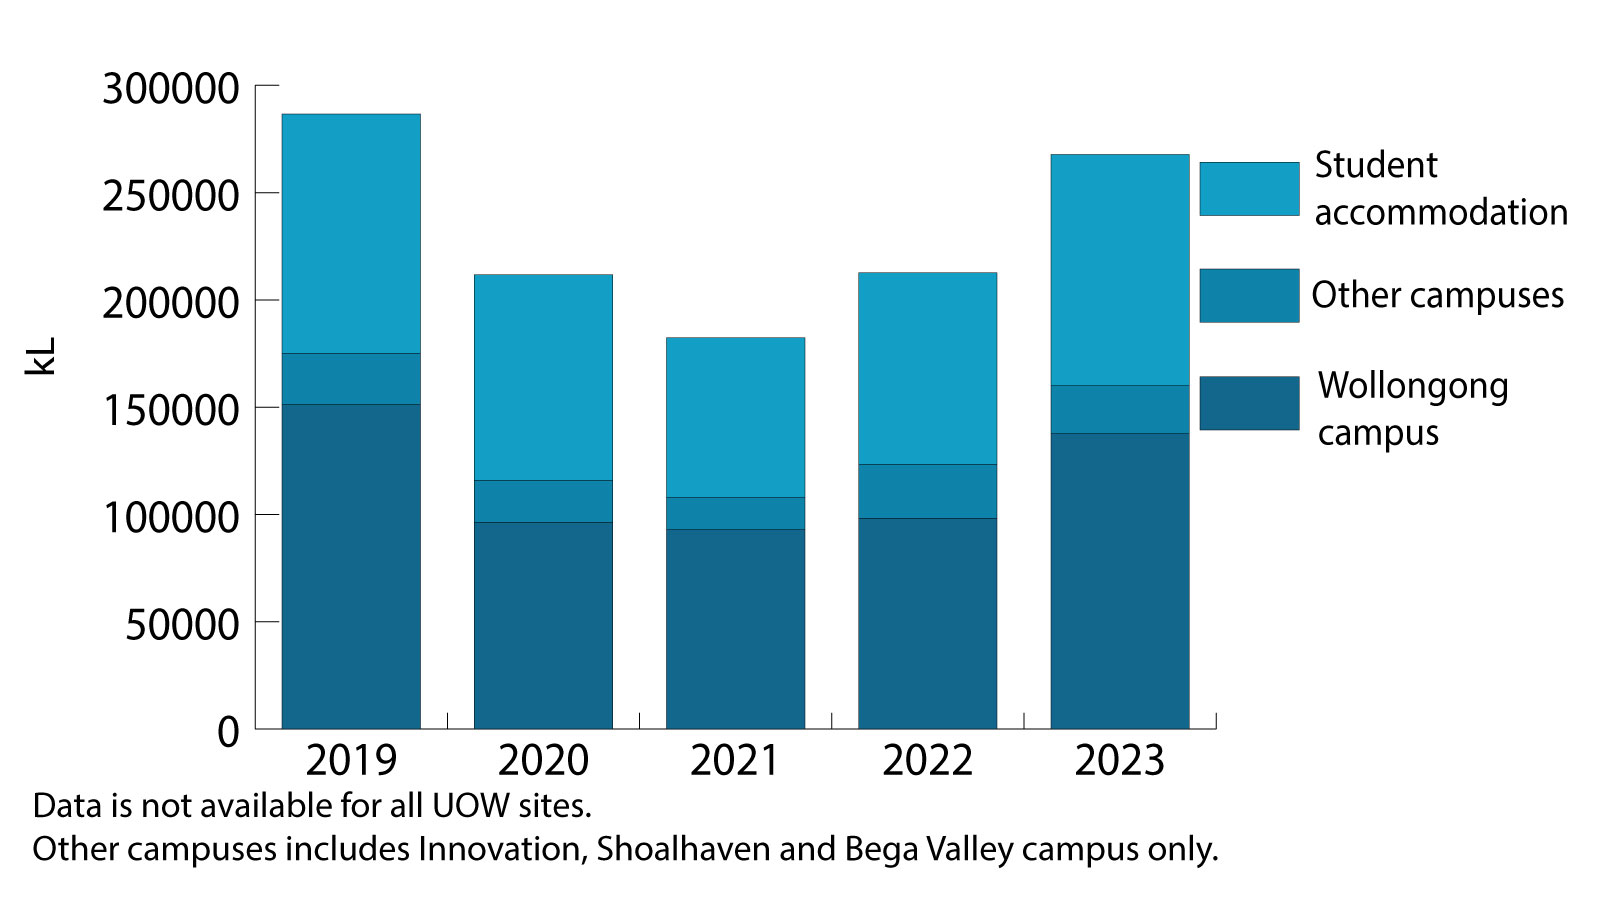 This graph shows the yearly water consumption for Wollongong, Innovation, Bega and Shoalhaven campus and Student accommodation for  2019 to 2023